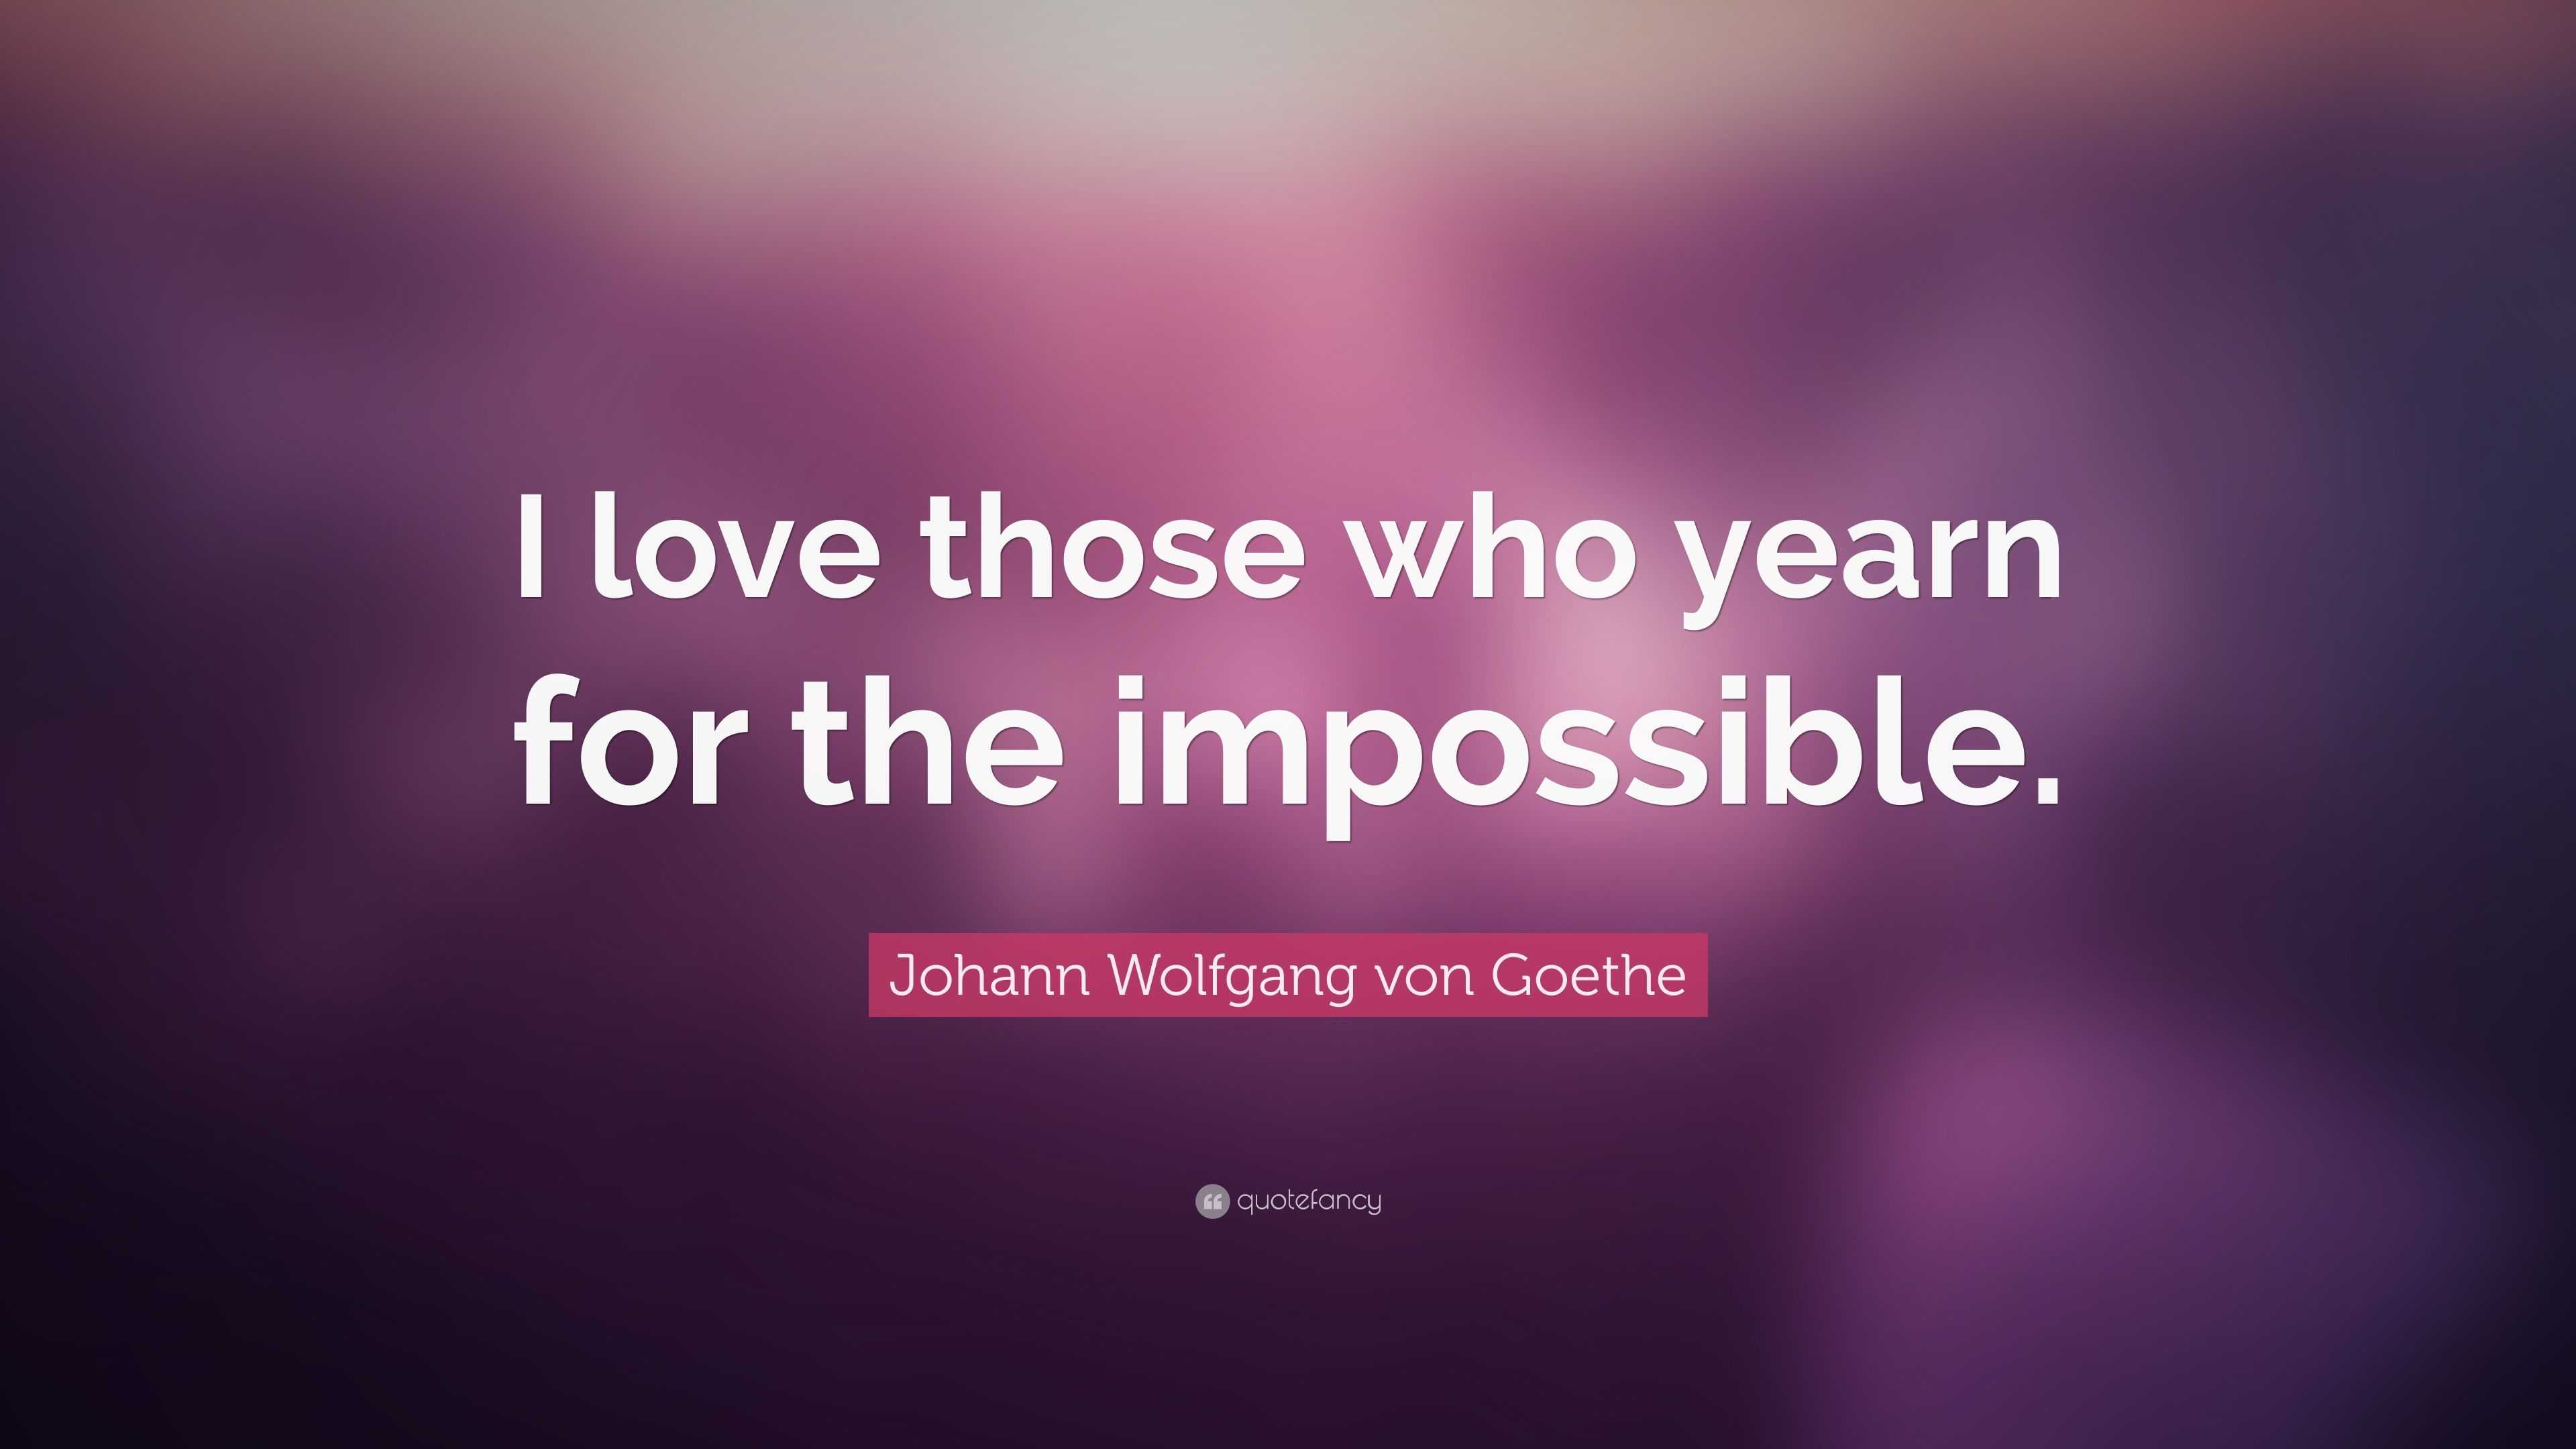 Johann Wolfgang von Goethe Quote: “I love those who yearn for the  impossible.”